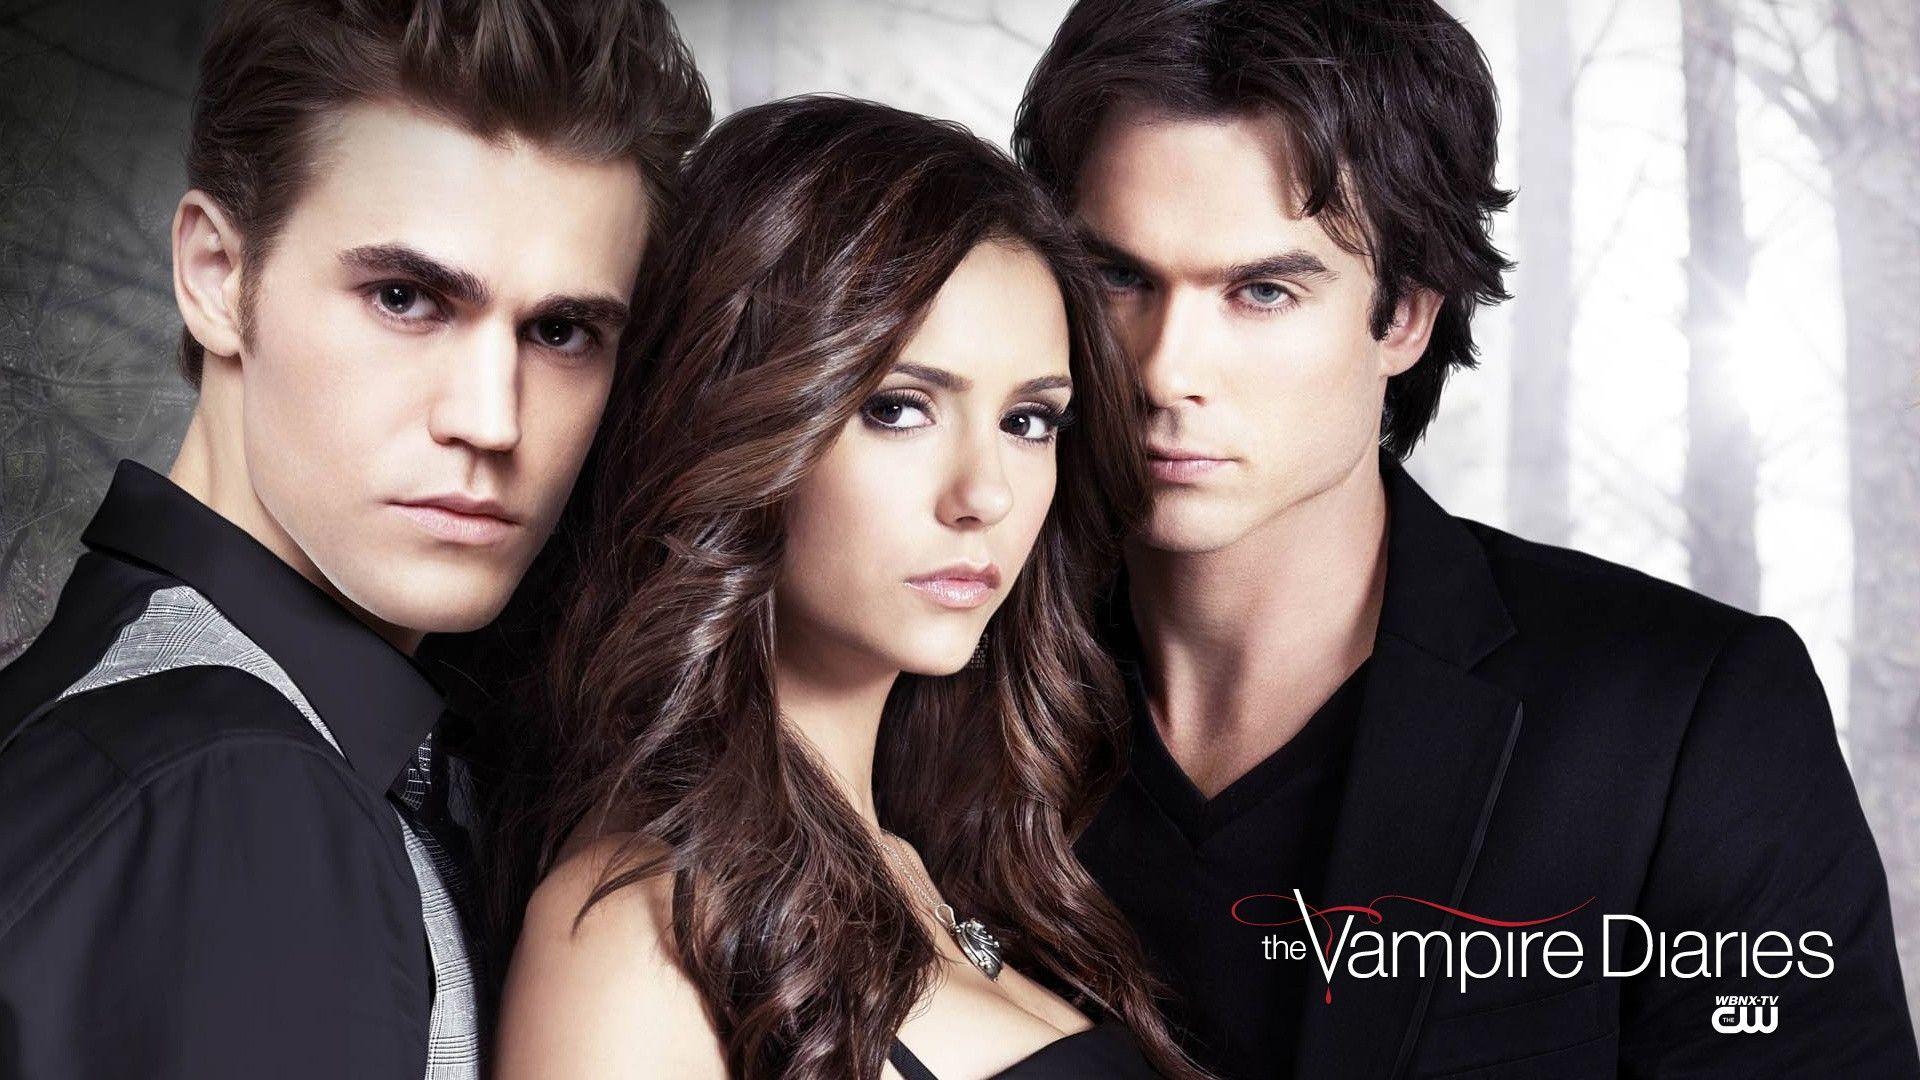 Download Characters Of The Vampire Diaries Iphone Wallpaper | Wallpapers.com